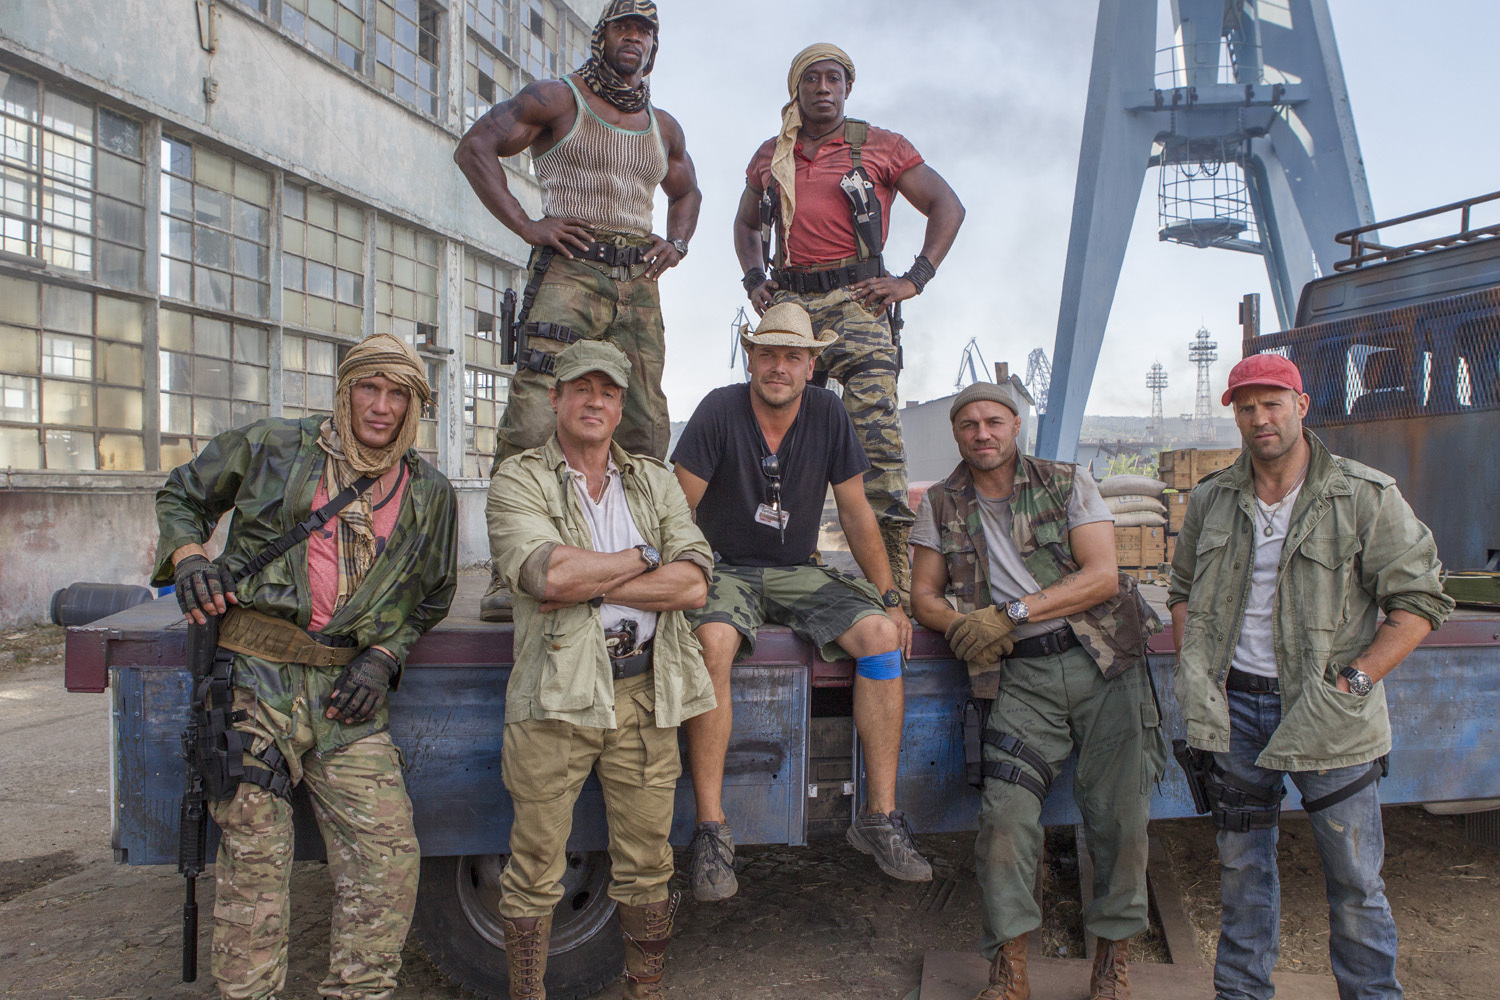 Dolph Lundgren, Sylvester Stallone, Wesley Snipes, Jason Statham, Terry Crews, Patrick Hughes and Randy Couture in Nesunaikinami 3 (2014)